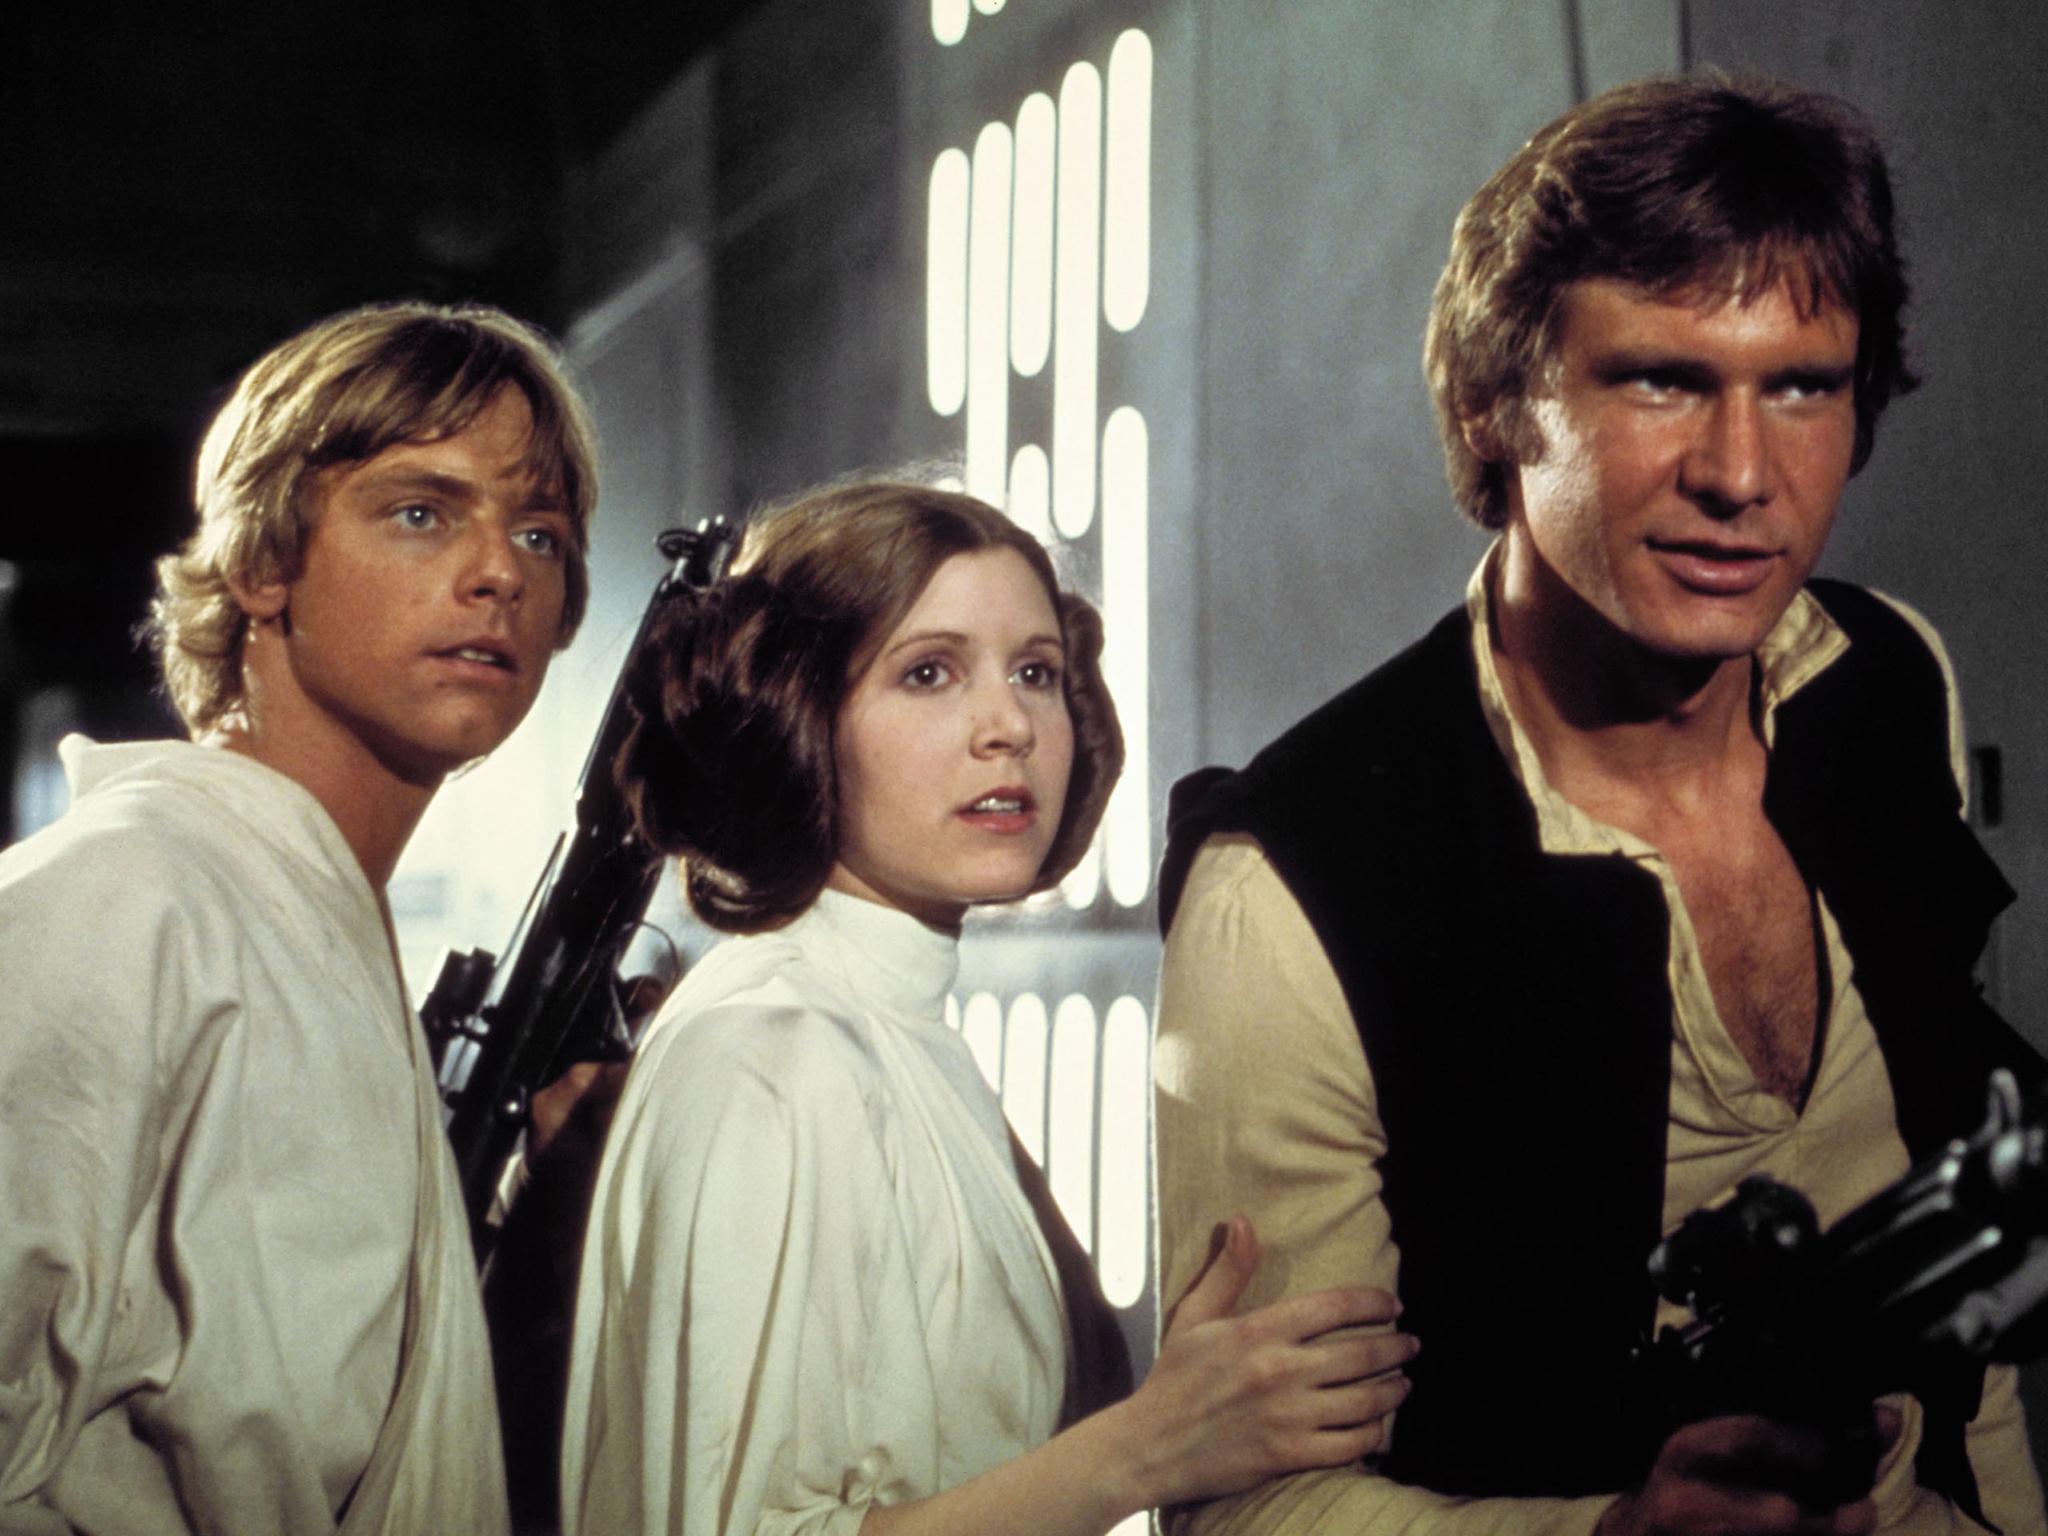 Hamill, Carrie Fisher, and Harrison Ford in 'Star Wars Episode IV - A New Hope' in 1977